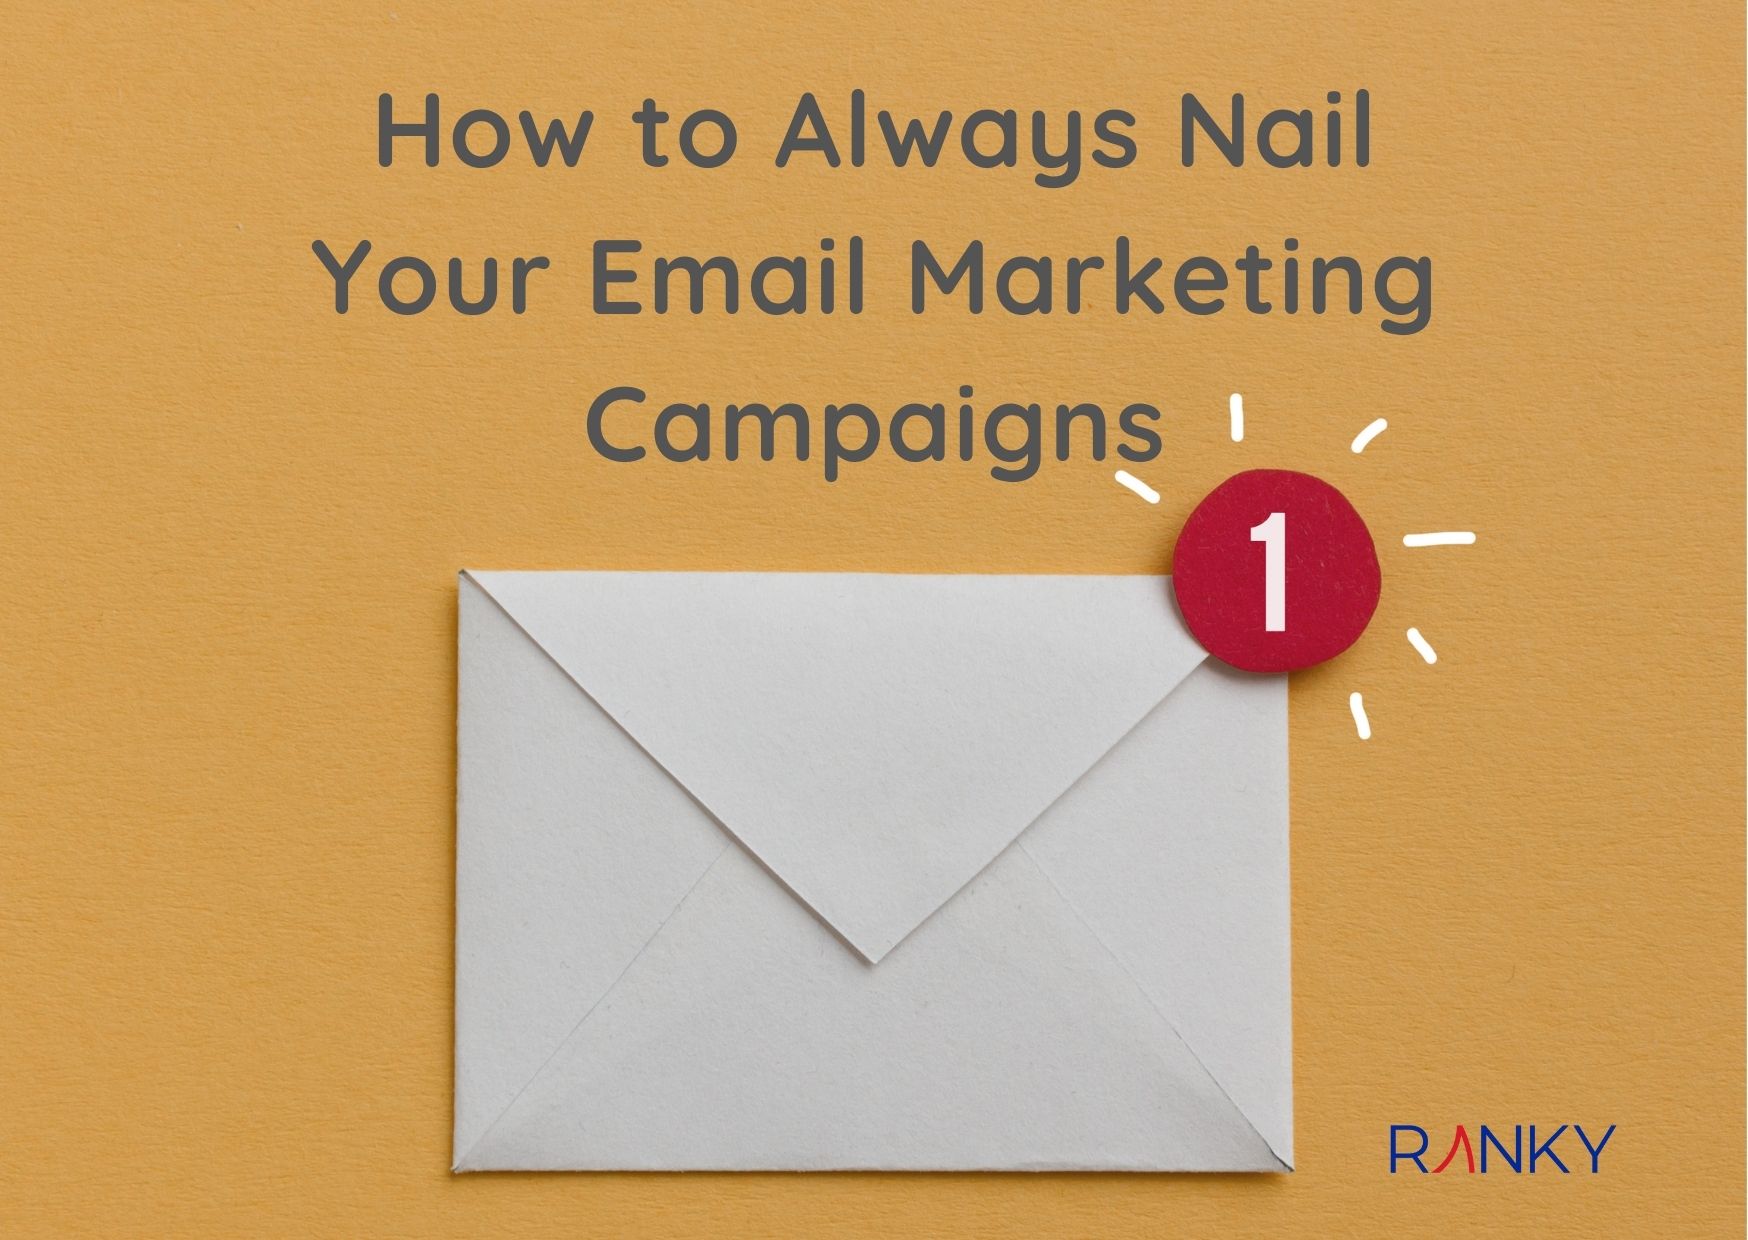 How to Always Nail Your Email Marketing Campaigns